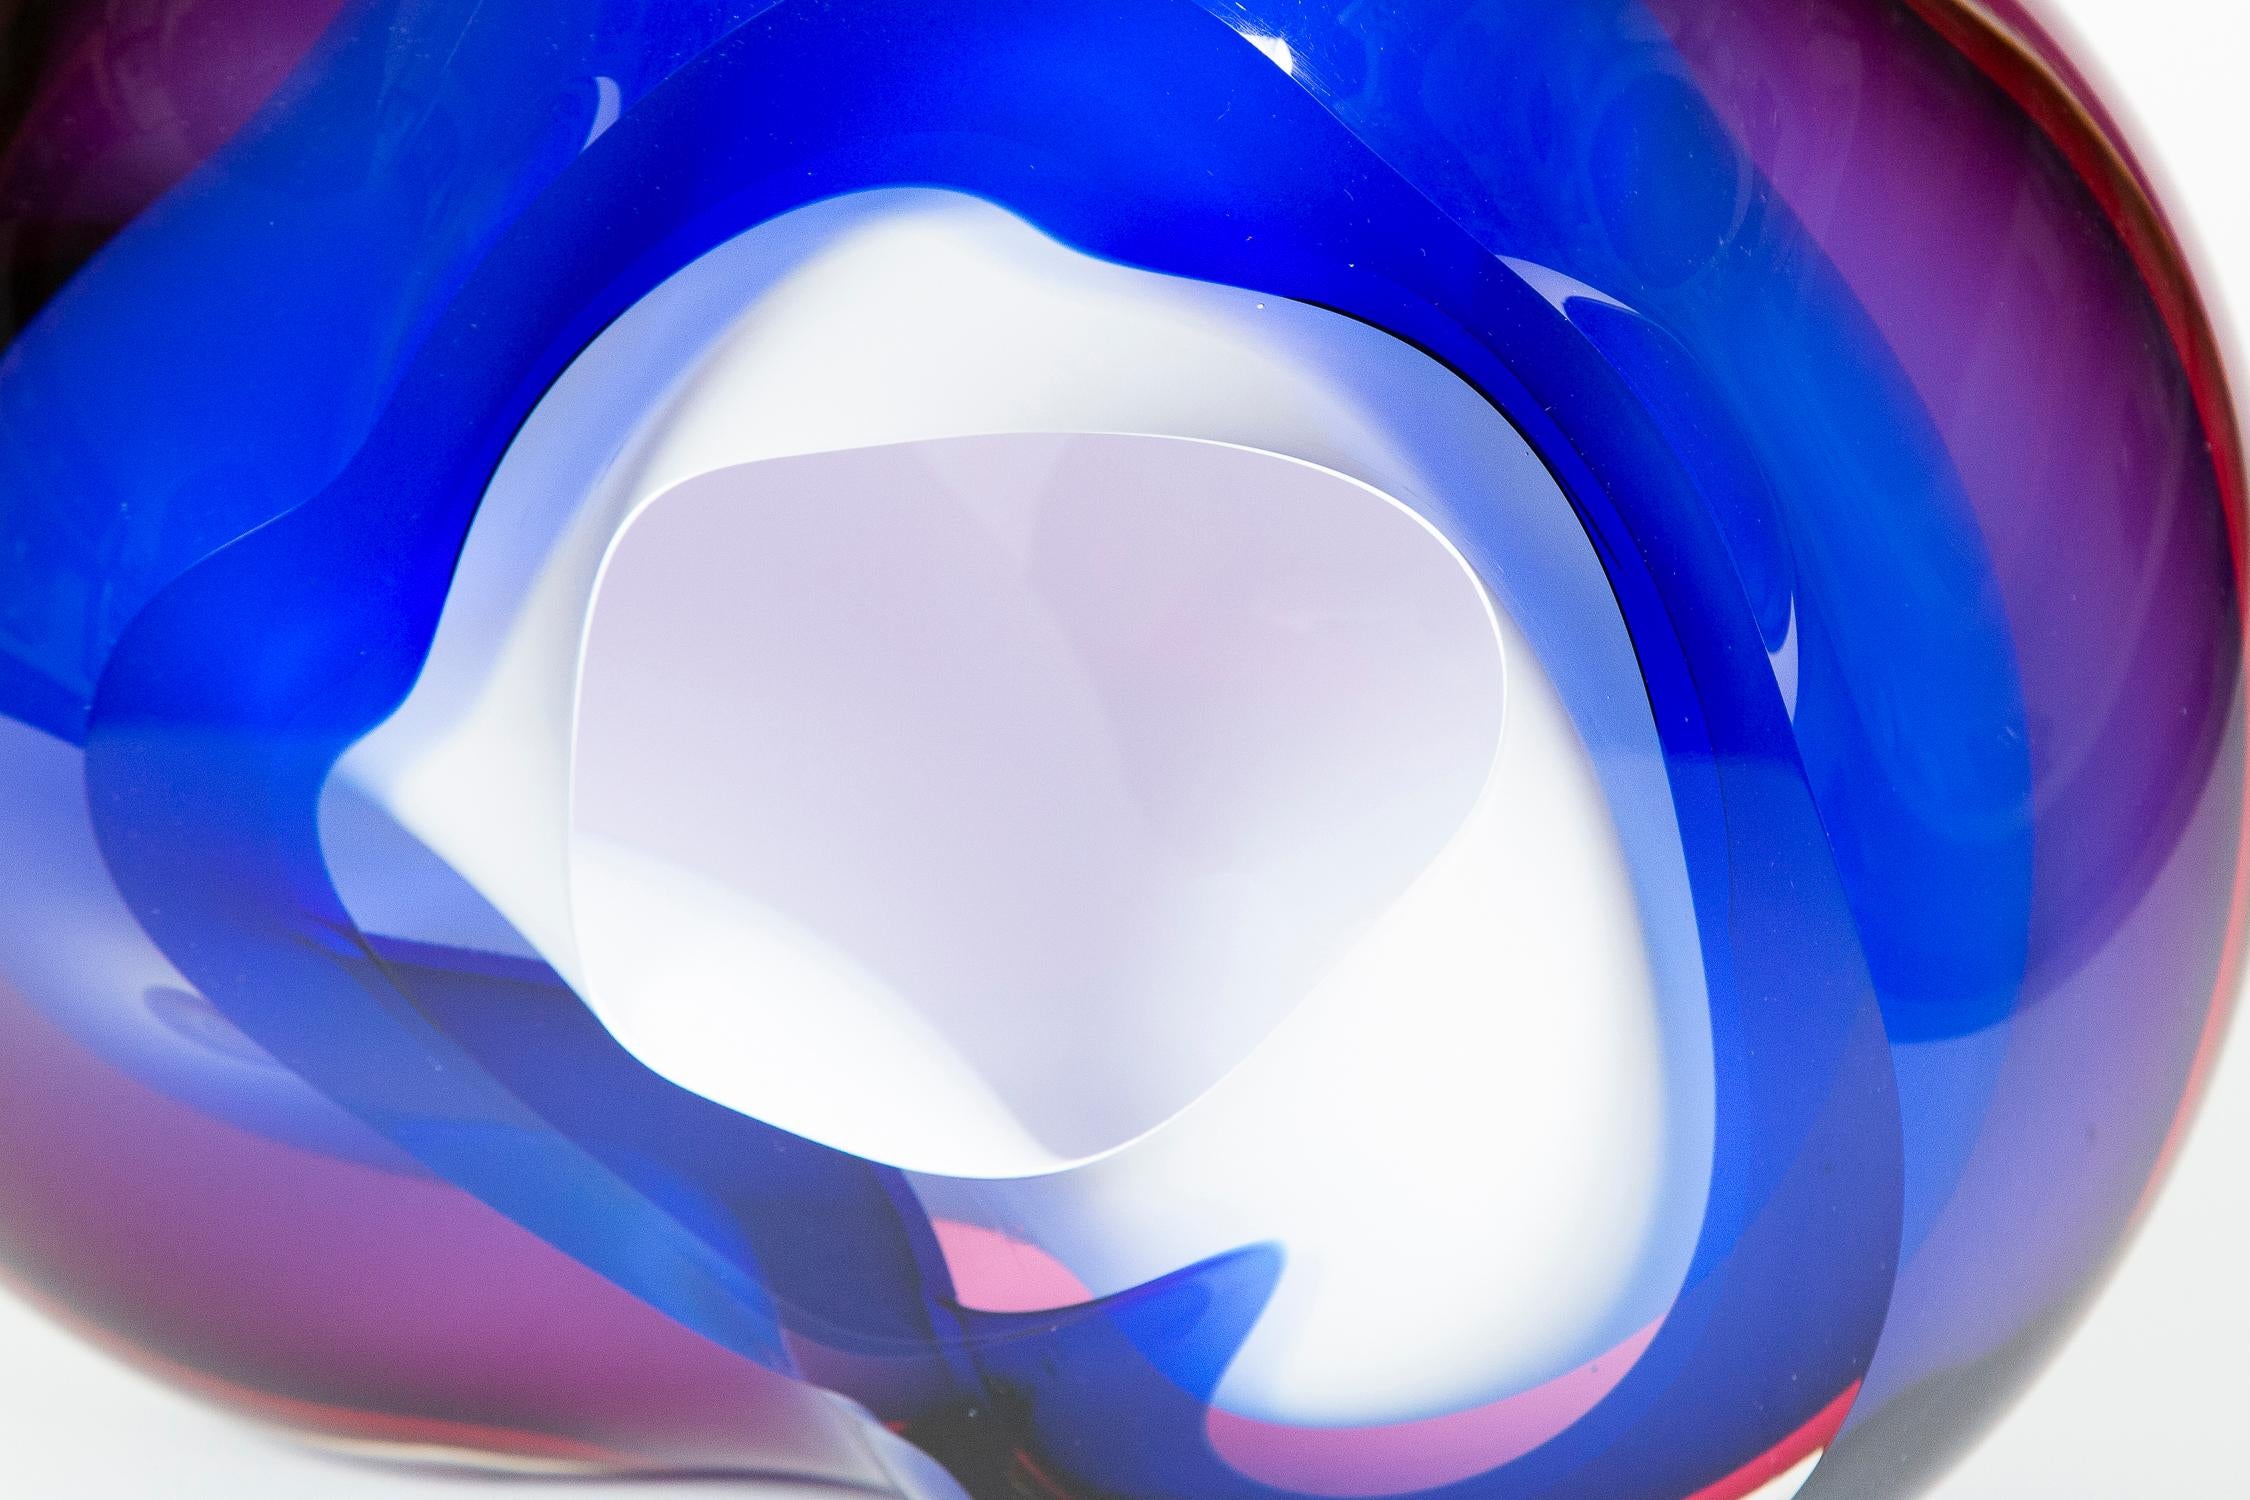 Chromatic Vug in Blue and Fuchsia is a unique handblown sculpture by the British artist Samantha Donaldson. Created by layers of coloured glass in blue and fuschia, surrounding an inner layer of opaque white, the outer transparent colours merge and